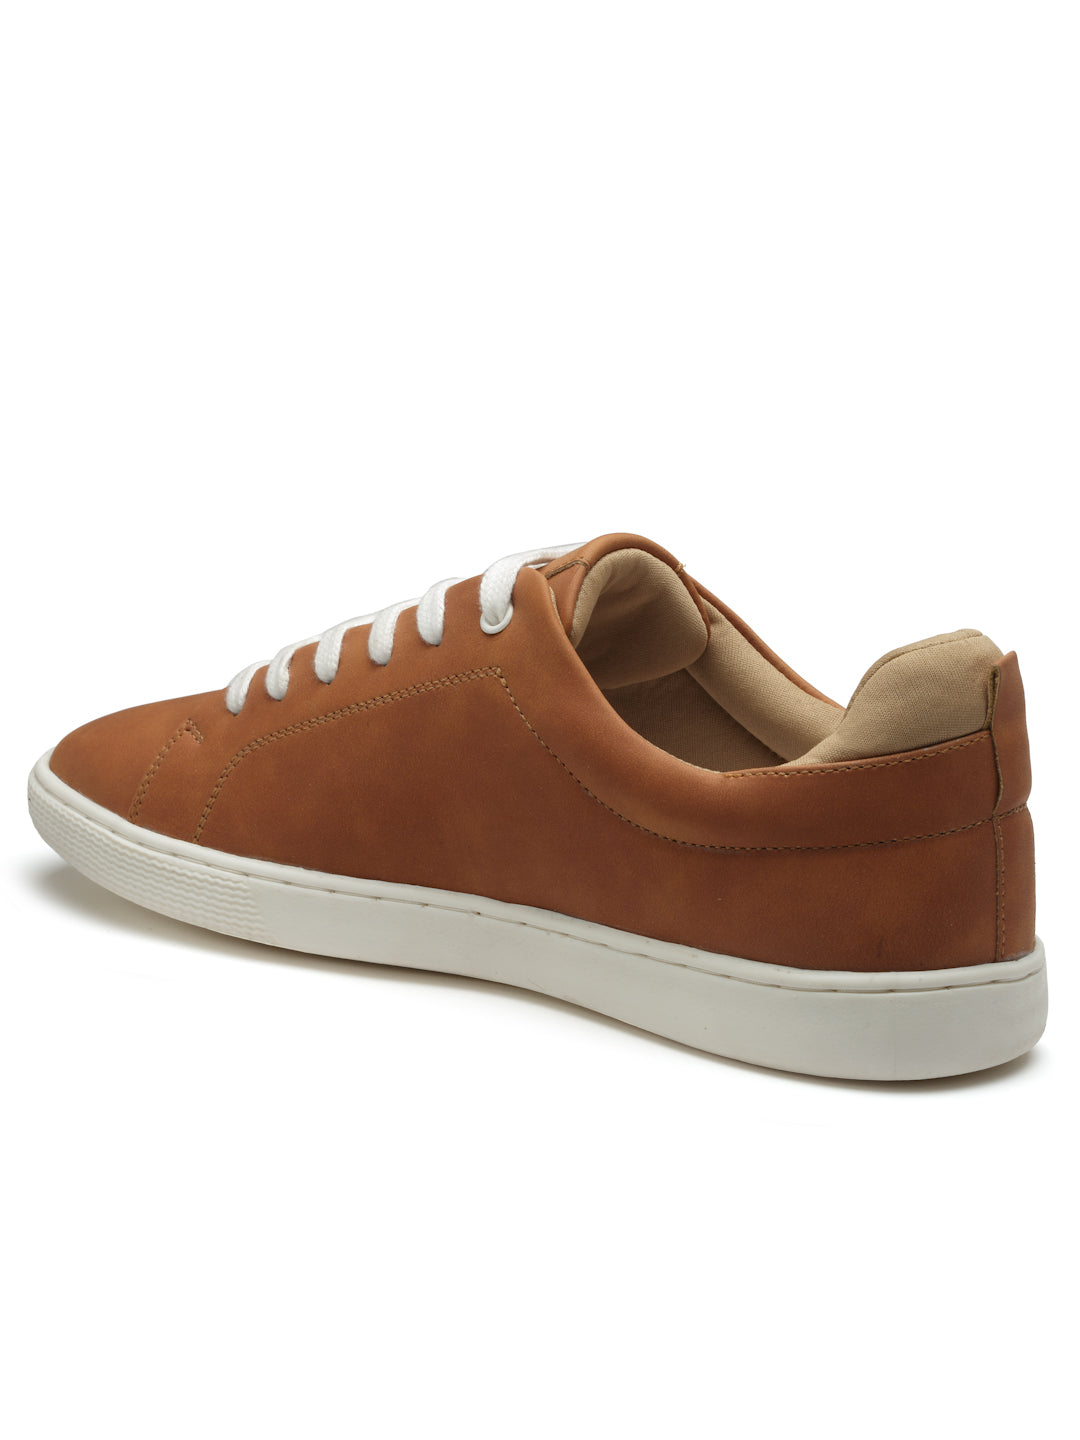 REFOAM Men's Tan Synthetic Leather Lace-Up Casual Sneaker